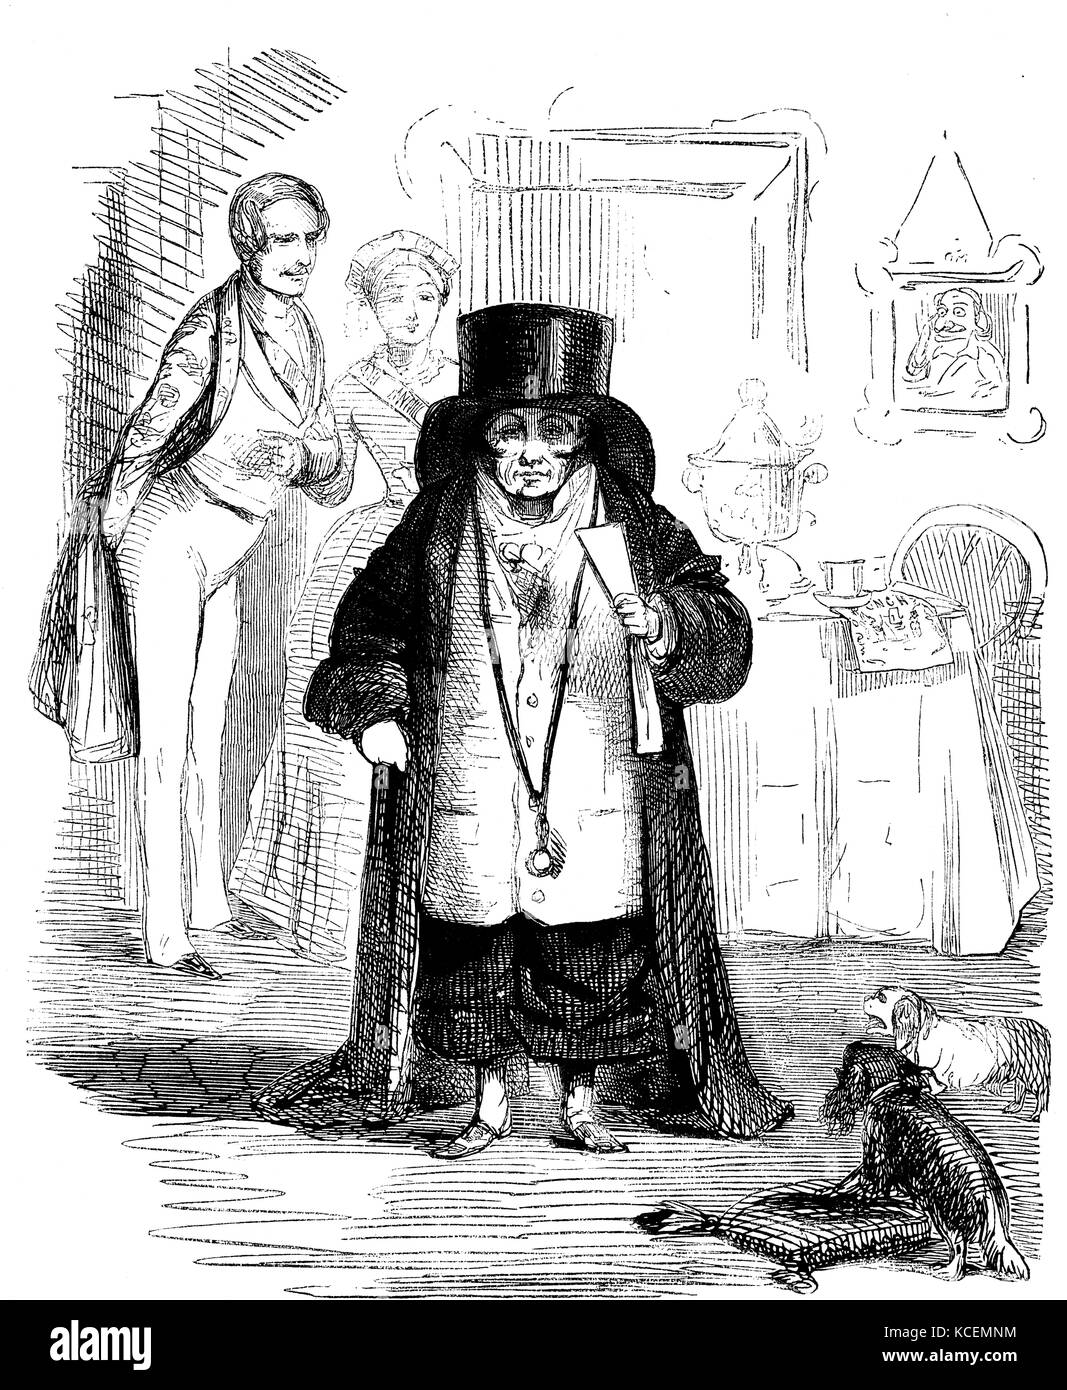 Lord John Russell, 1792-1878. On the defeat of Robert Peel in 1846, Russell became Prime Minister in his place. This cartoon shows him taking on Peel's mantle. He was of small stature, and this cartoon shows him physically inadequate to fill Peel's place and, by implication, politically inadequate. In the background Queen Victoria and Prince Albert look on. 1846 Stock Photo